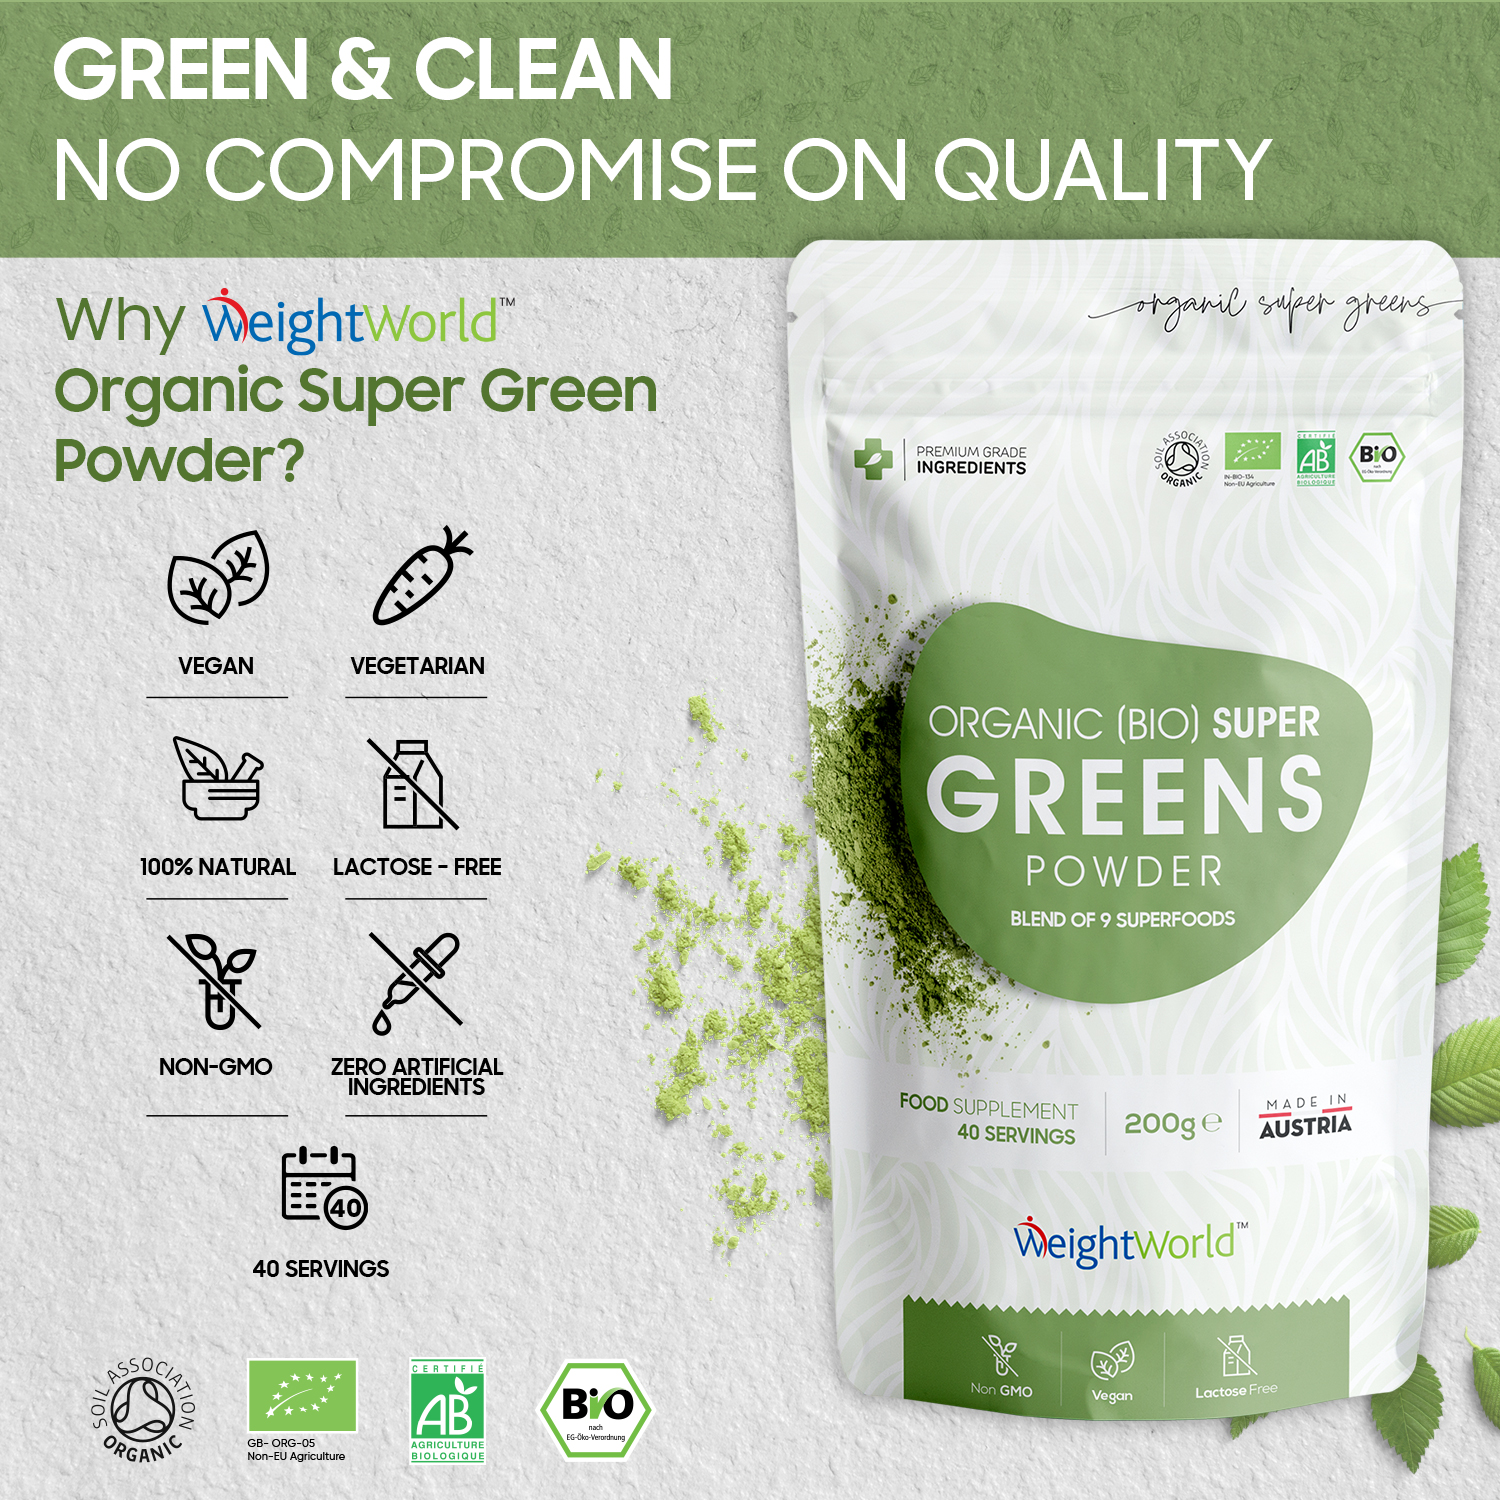 Organic Super Greens Powder from EarthBiotics - Simplified Nutritional Information